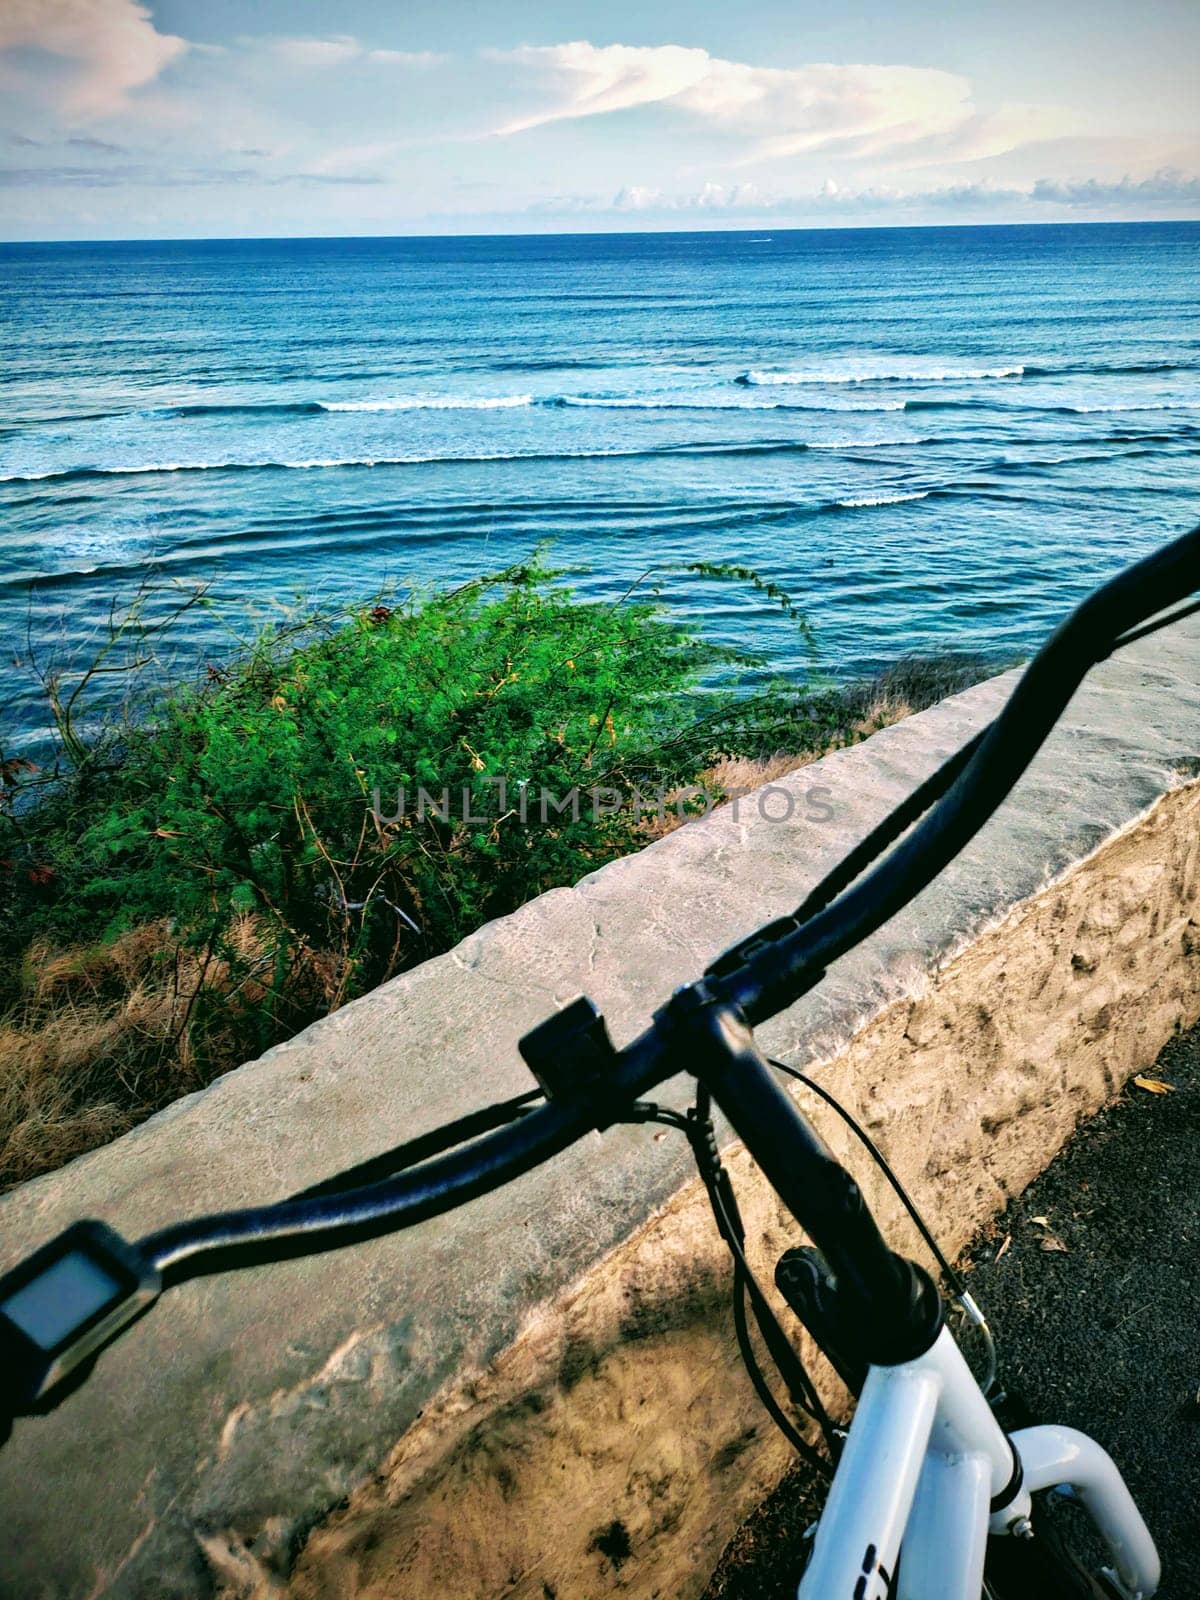 Honolulu - September 4, 2023: An ebike parked at the Diamond Head lookout with a beautiful view of the ocean. The photo shows the white bike with black handlebars and the blue water and sky in the background. The photo is taken from the perspective of someone standing behind the bike.
Keywords: 